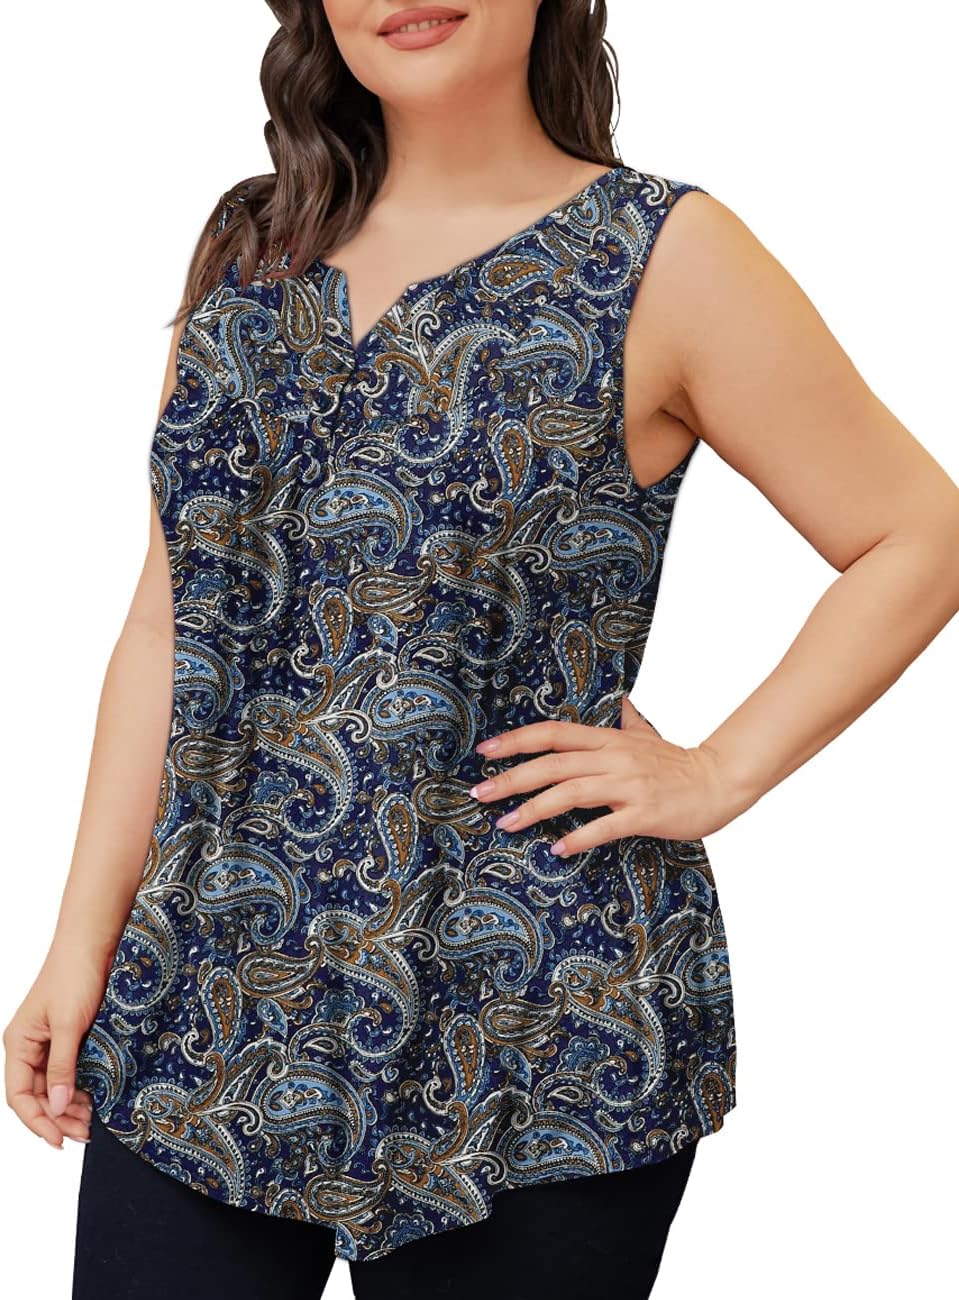 Othyroce Women's Plus Size Tunic Tops: A Stylish and Comfortable Summer Essential